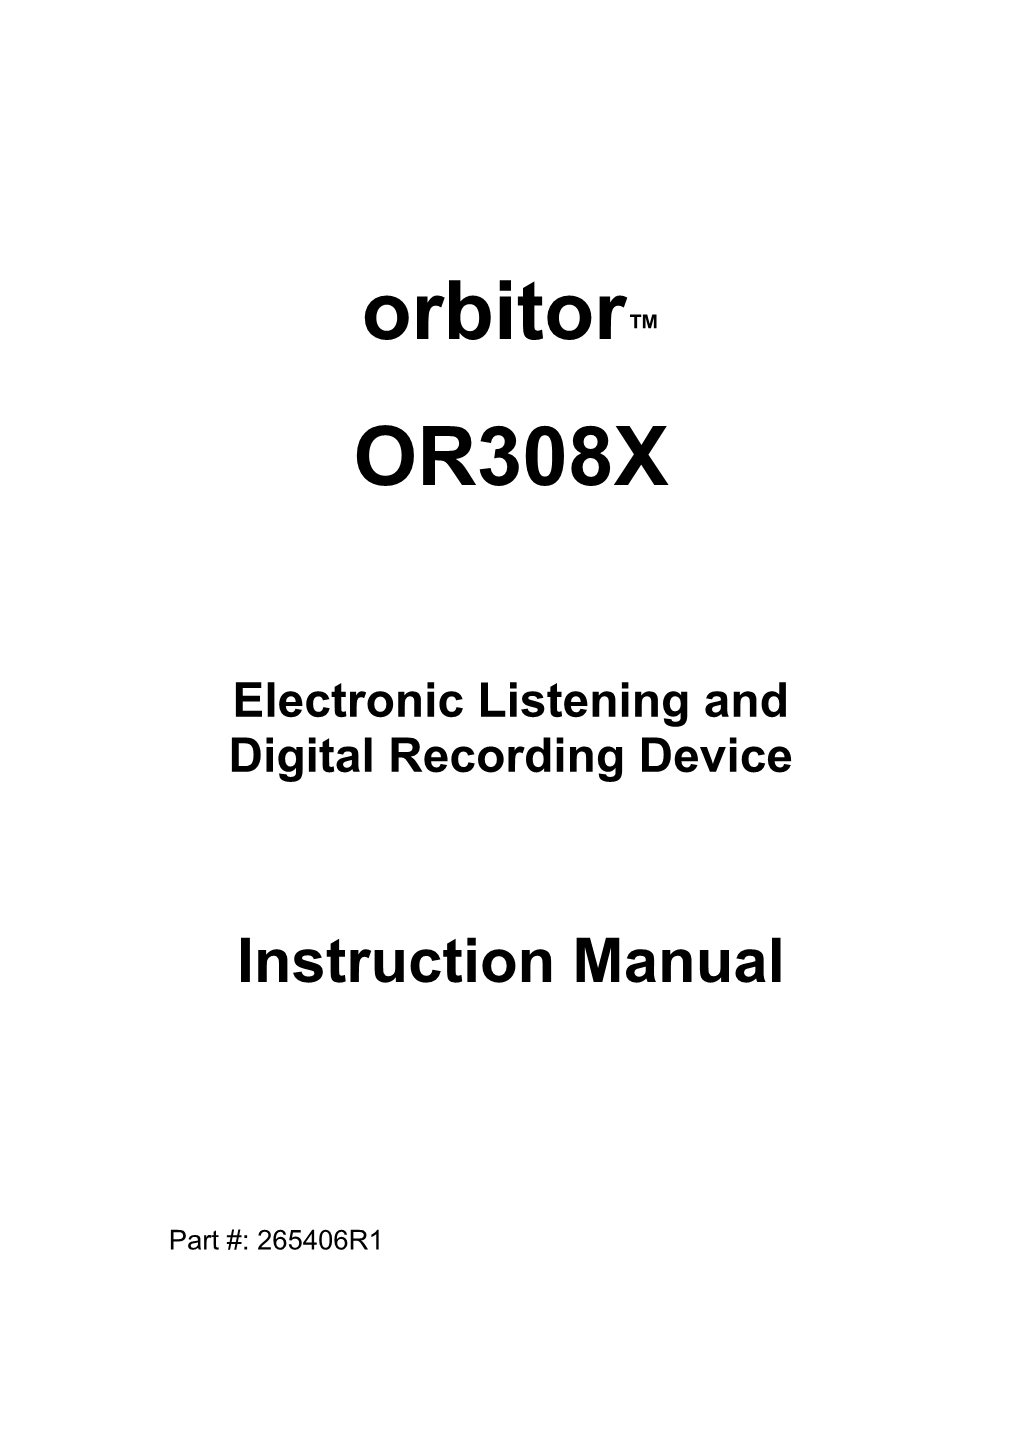 Here Are the Main Parts of the Orbitor OR308X